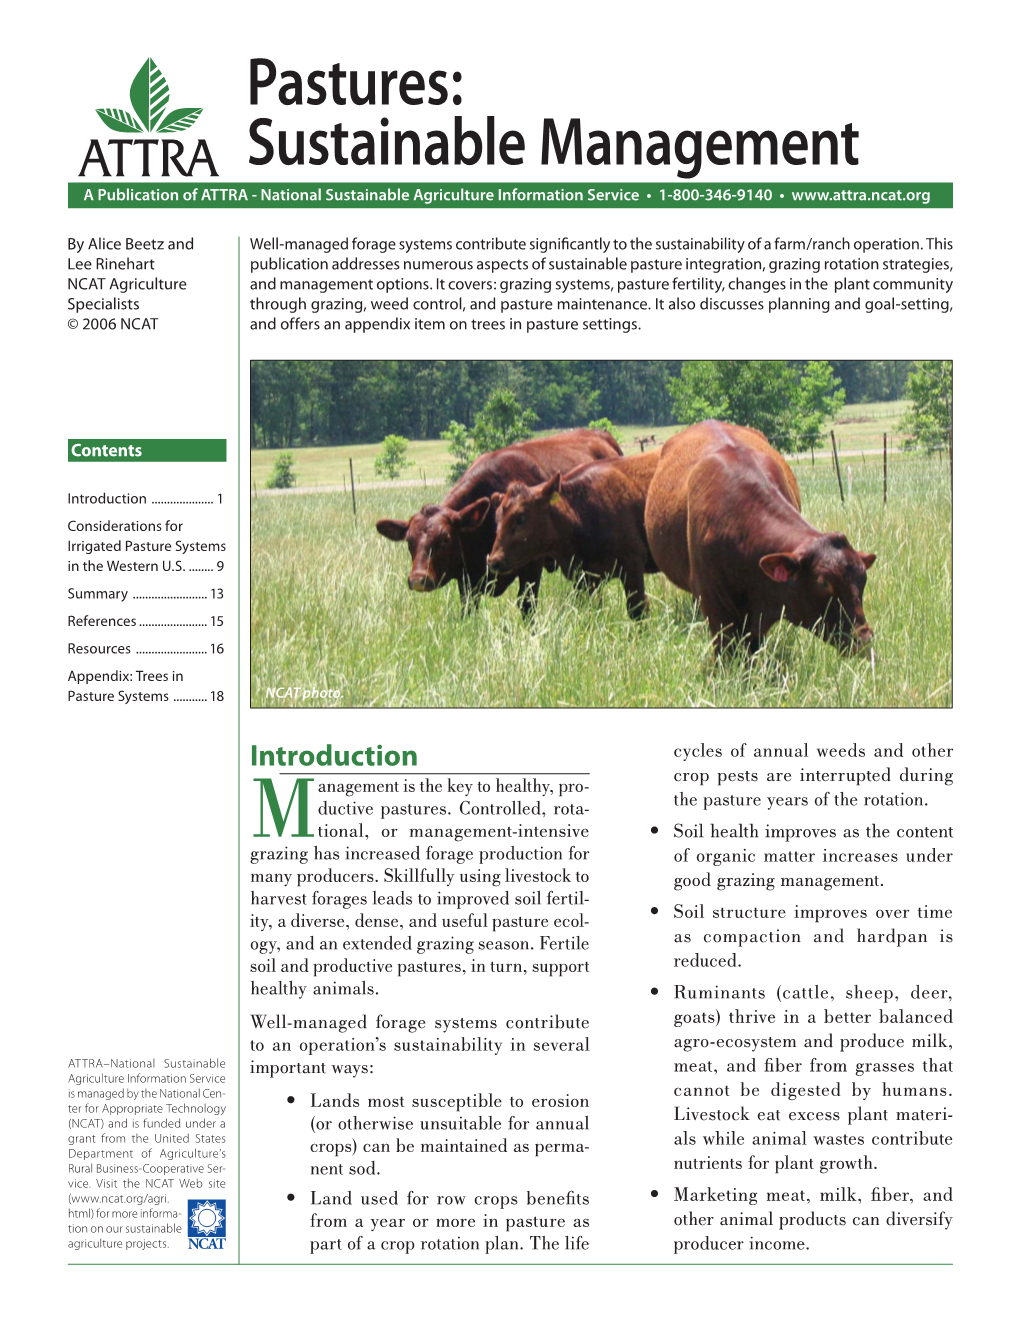 Pastures: Sustainable Management